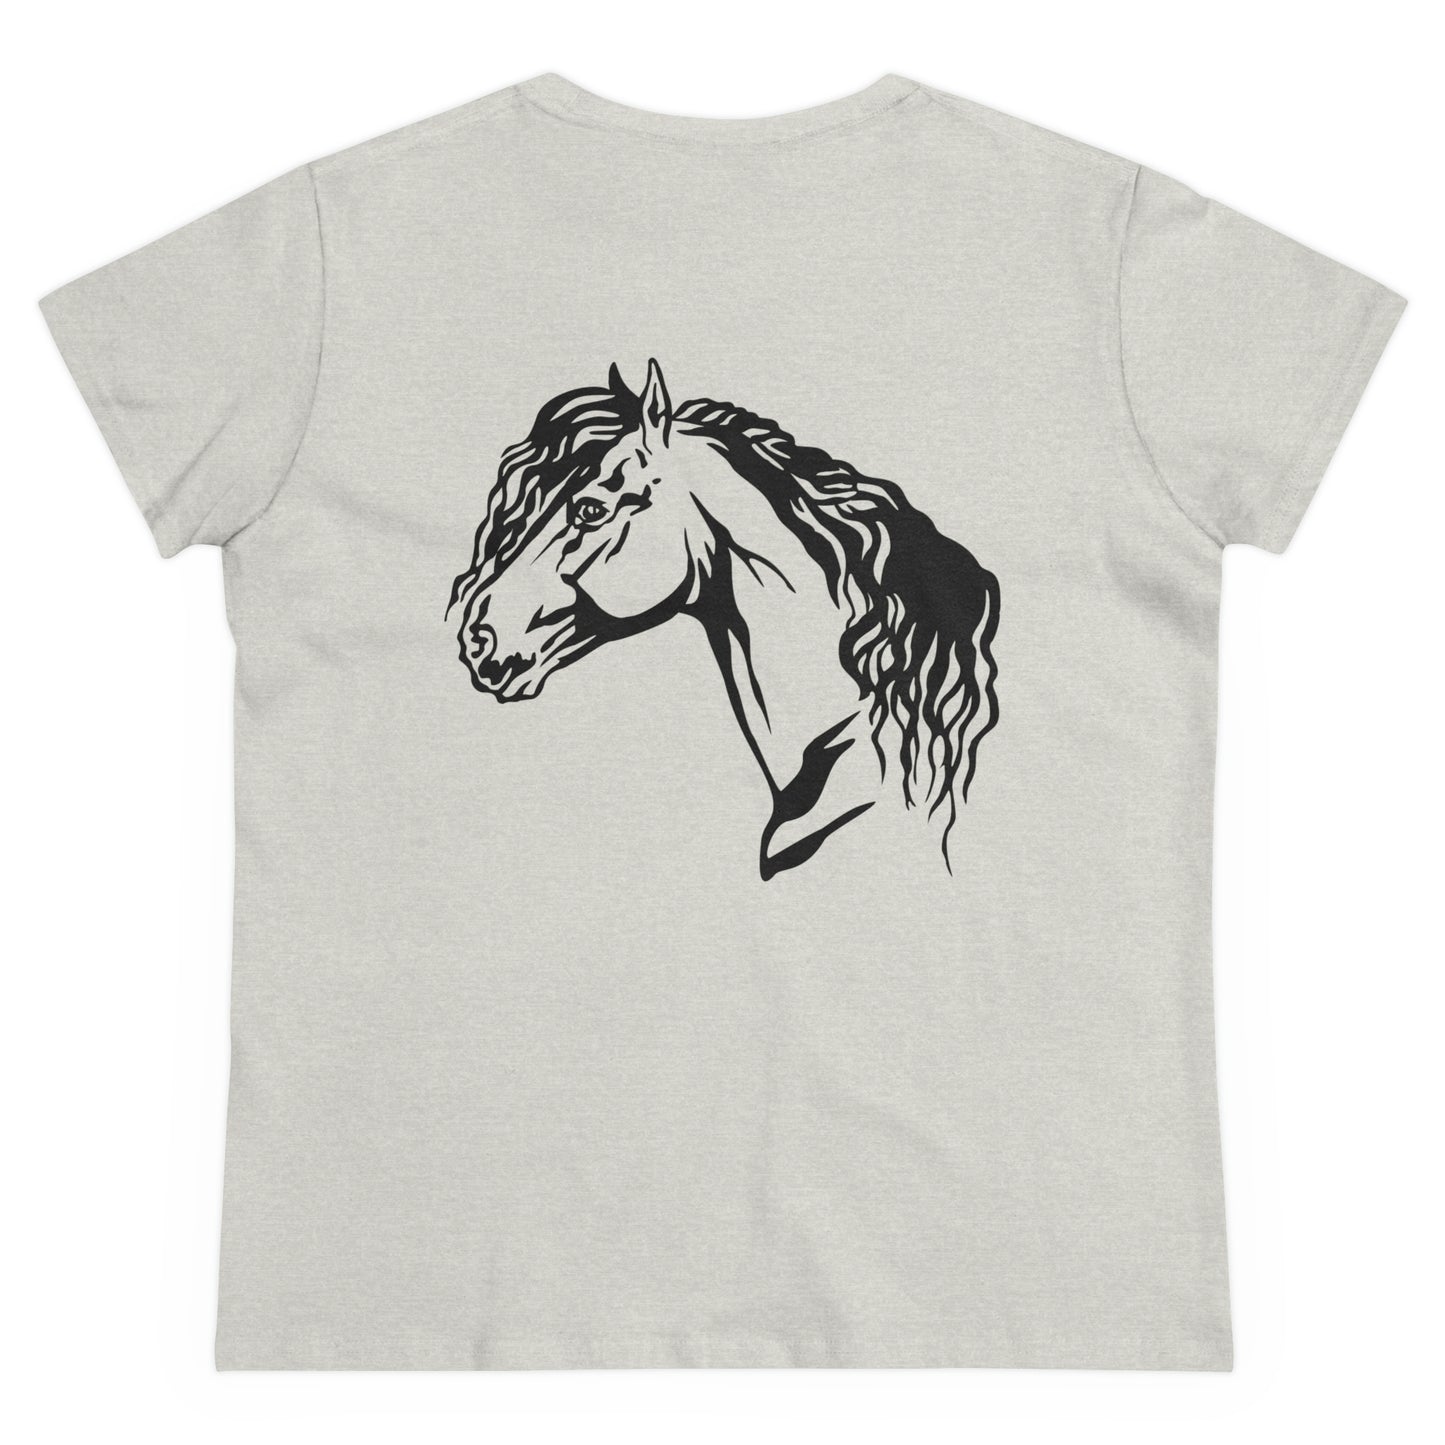 Friesian obsessed woman's t-shirt